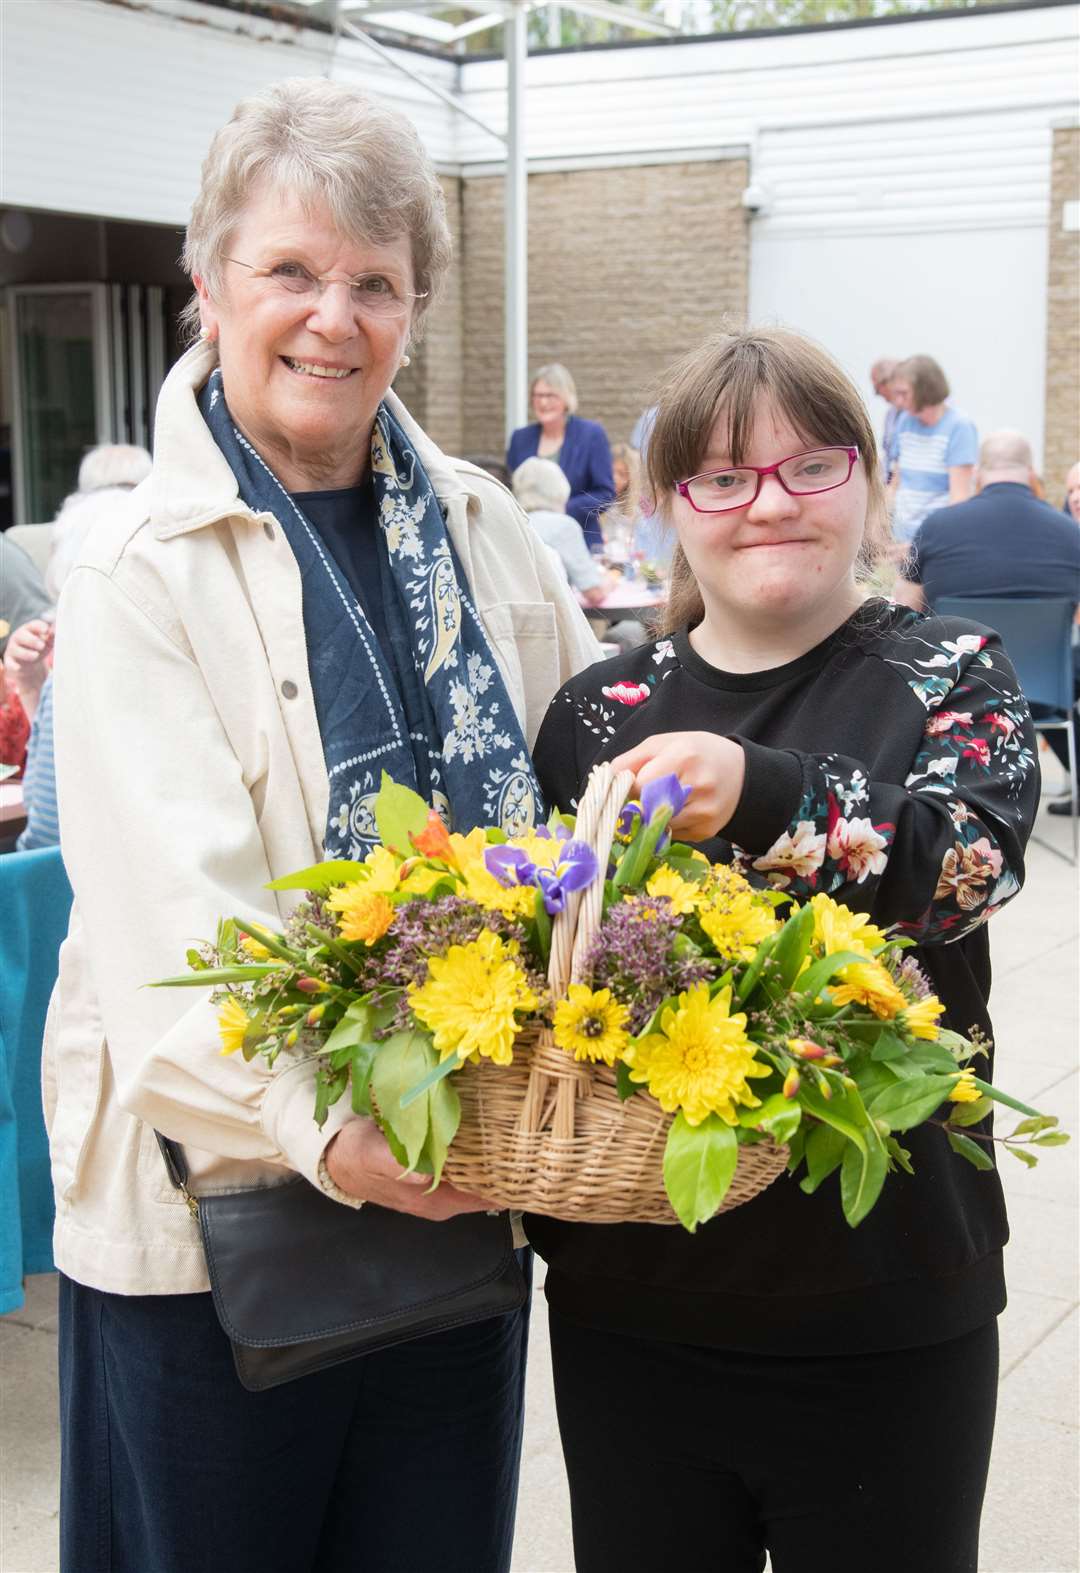 Pat Emslie was presented with flowers from former pupil Jane Rennie at a surprise aprty to mark her retirement from The Gordon Schools in Huntly after 44 years of service. Picture: Daniel Forsyth.